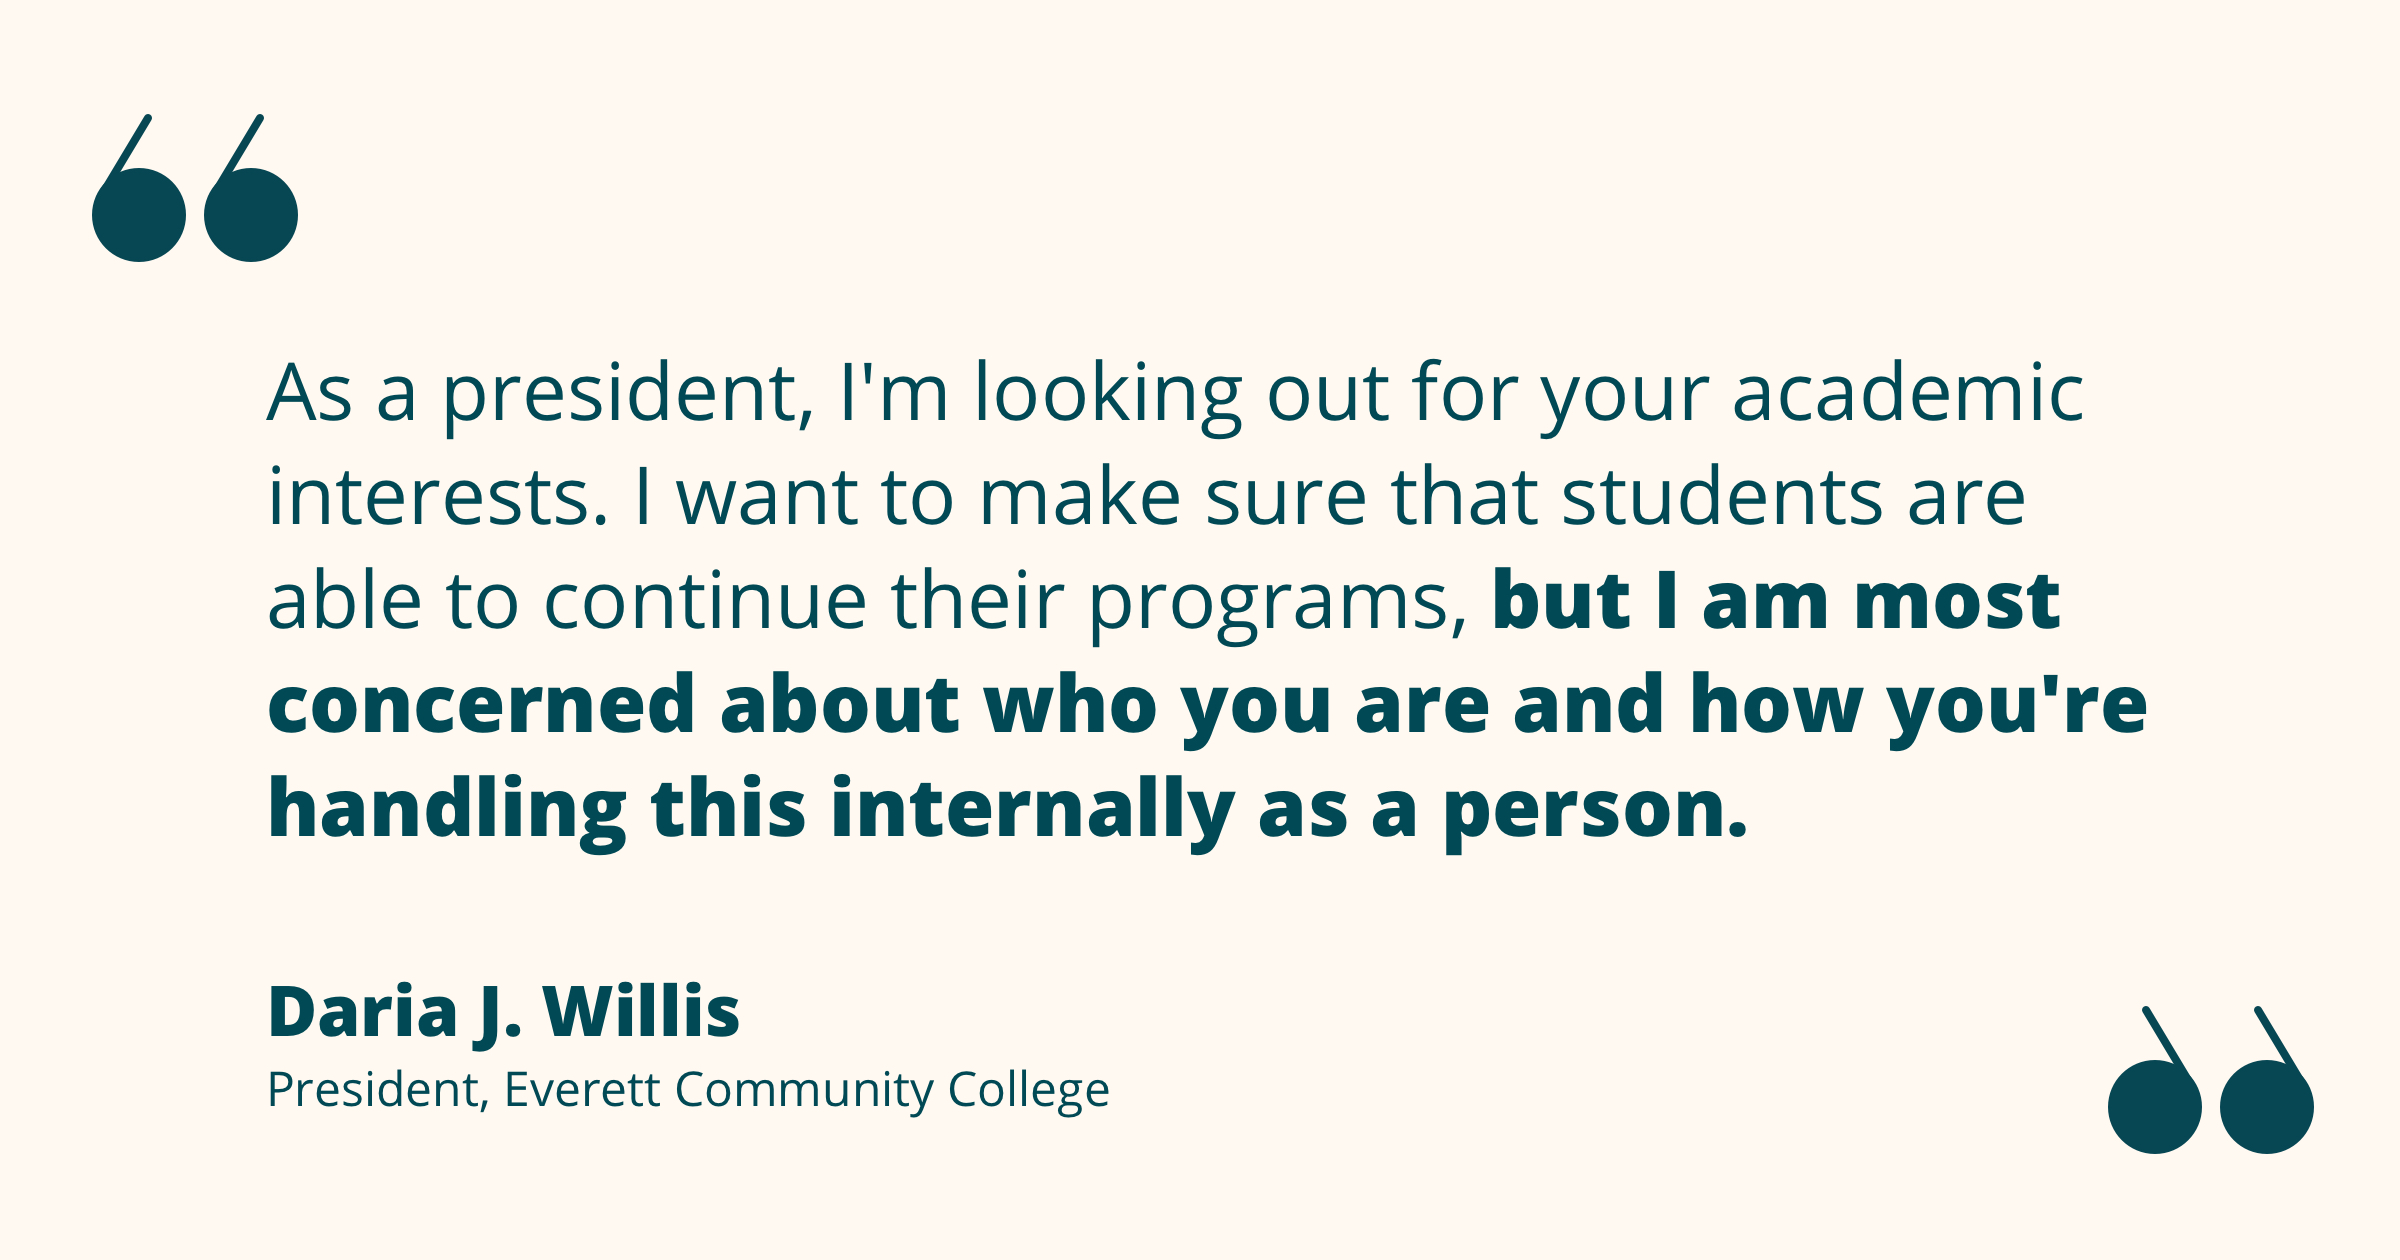 Quote by Daria J. Willis re: looking out for students’ academic interests while caring about their personal well-being.